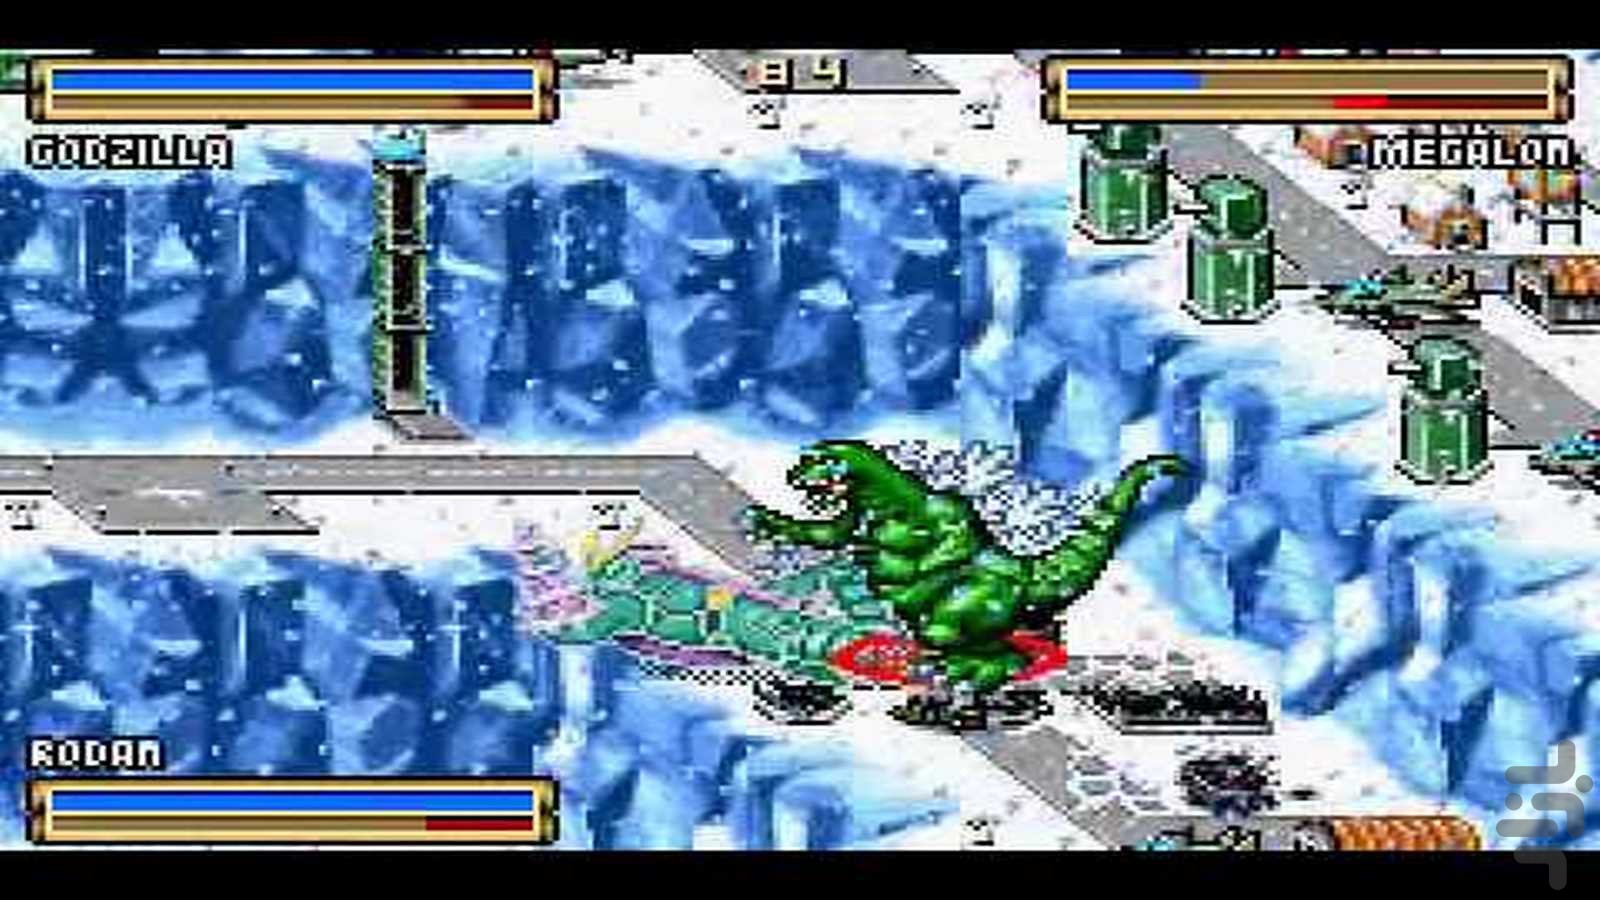 Godzilla - Domination gba Game for Android - Download | Bazaar